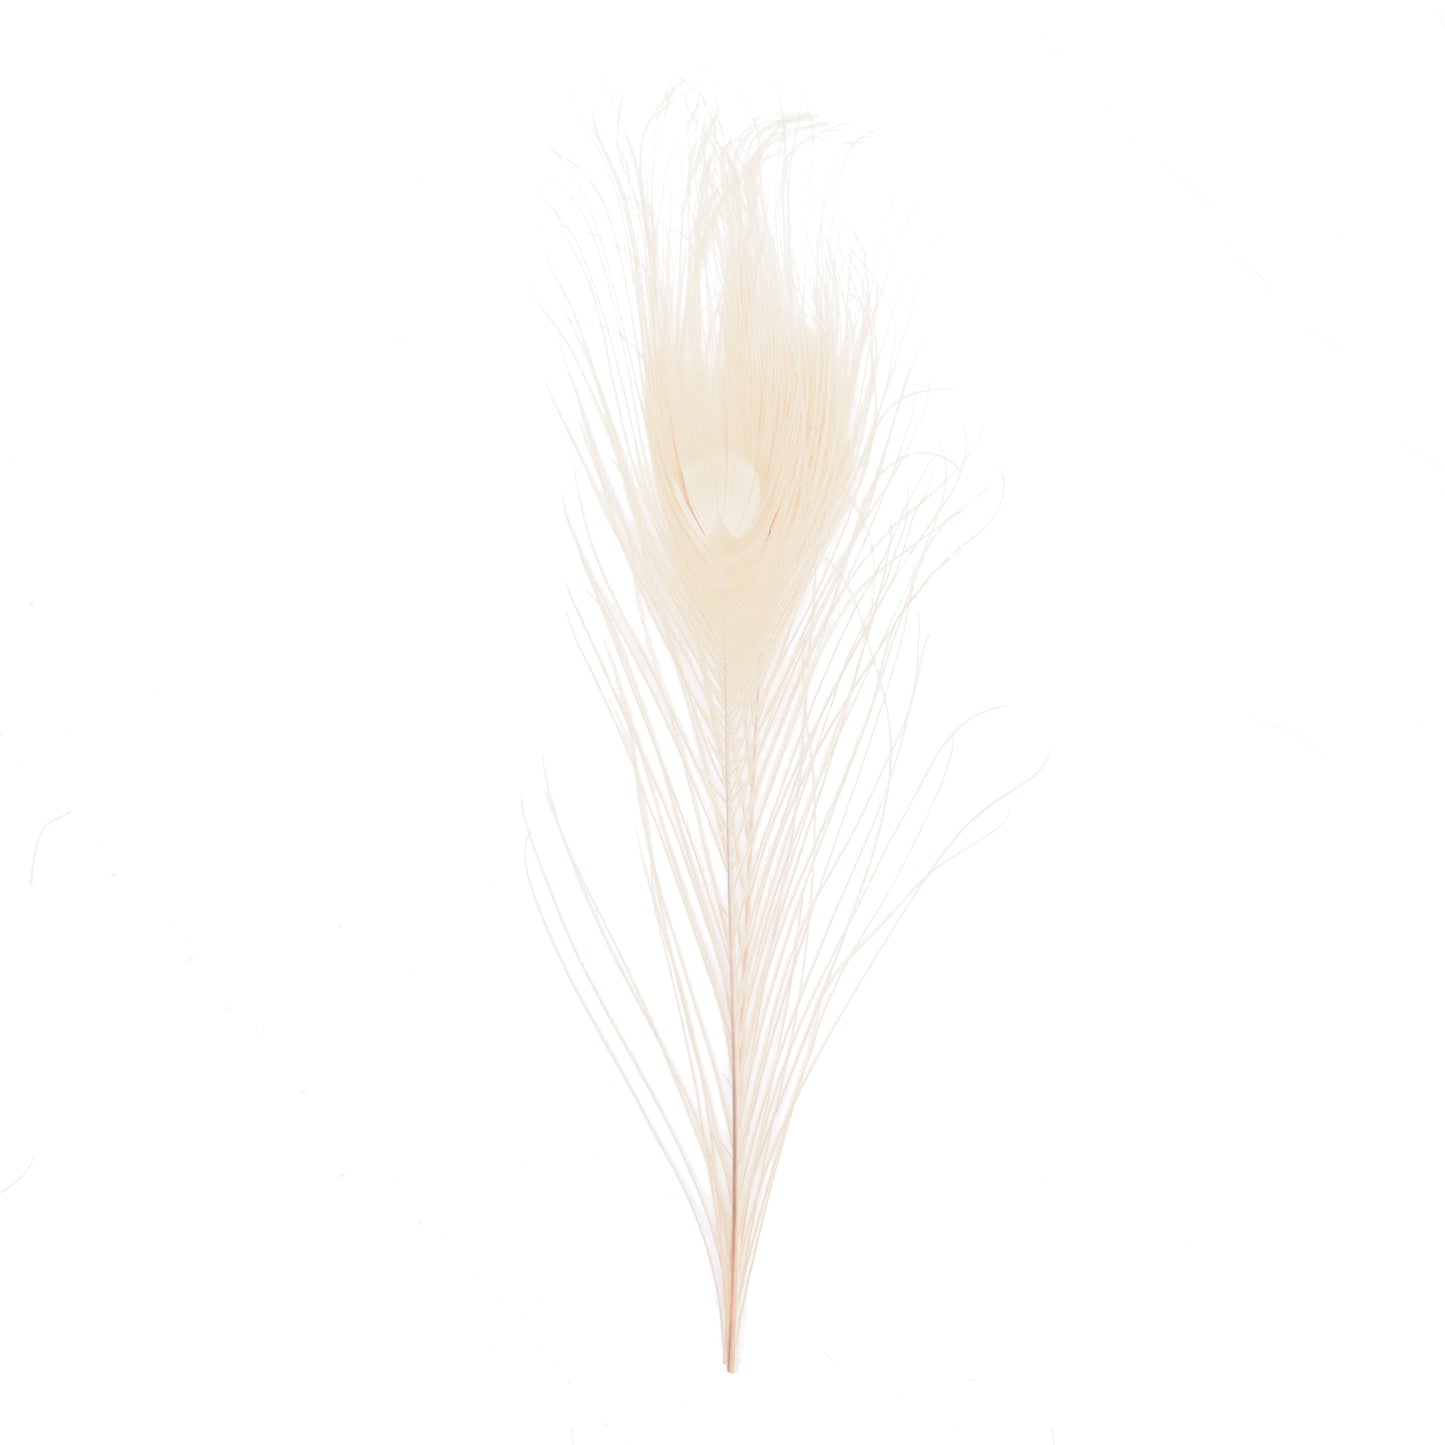 Stripped Peacock Quills